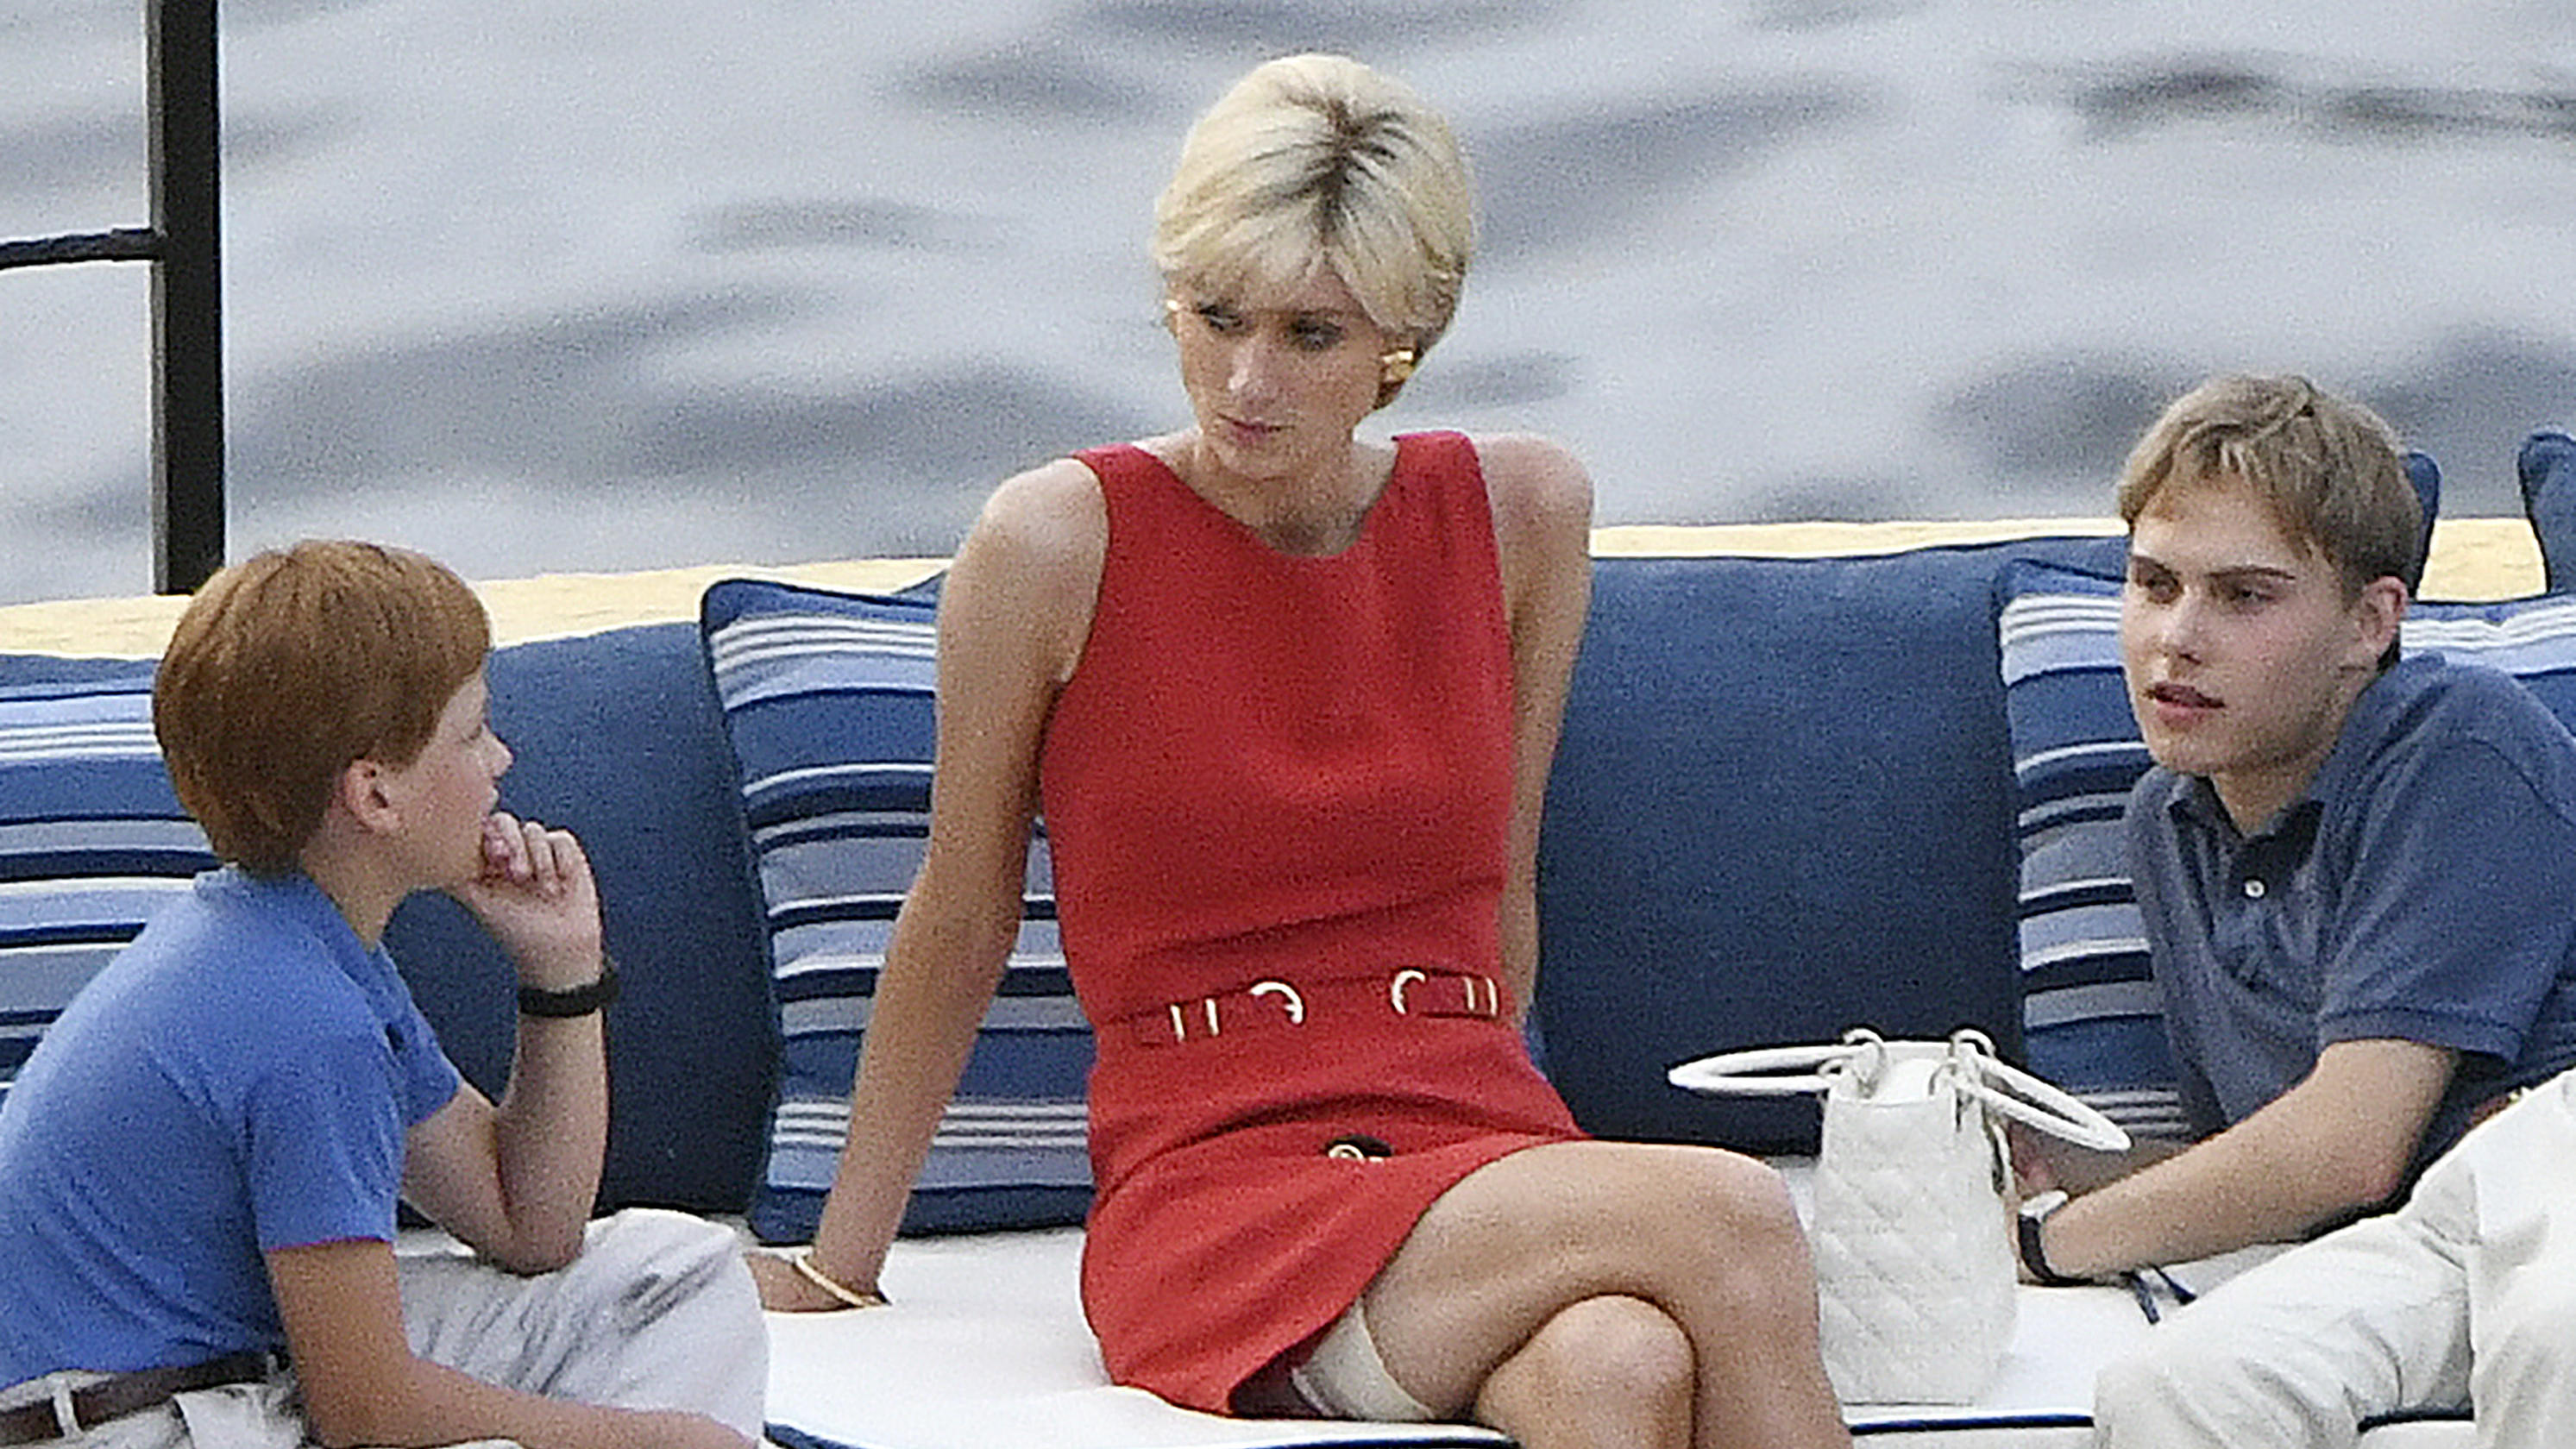 SONDERKONDITIONEN: MINDESTHONORAR: EXCLUSIVE: ** EMBARGO: Strictly No Web Permitted Before 11.45am BST Oct 11th 2022 (ET 06:45am)** Elizabeth Debicki as Lady Diana Spencer filming 'The Crown' In Mallorca, Spain.In this scene (believed to be a recreat